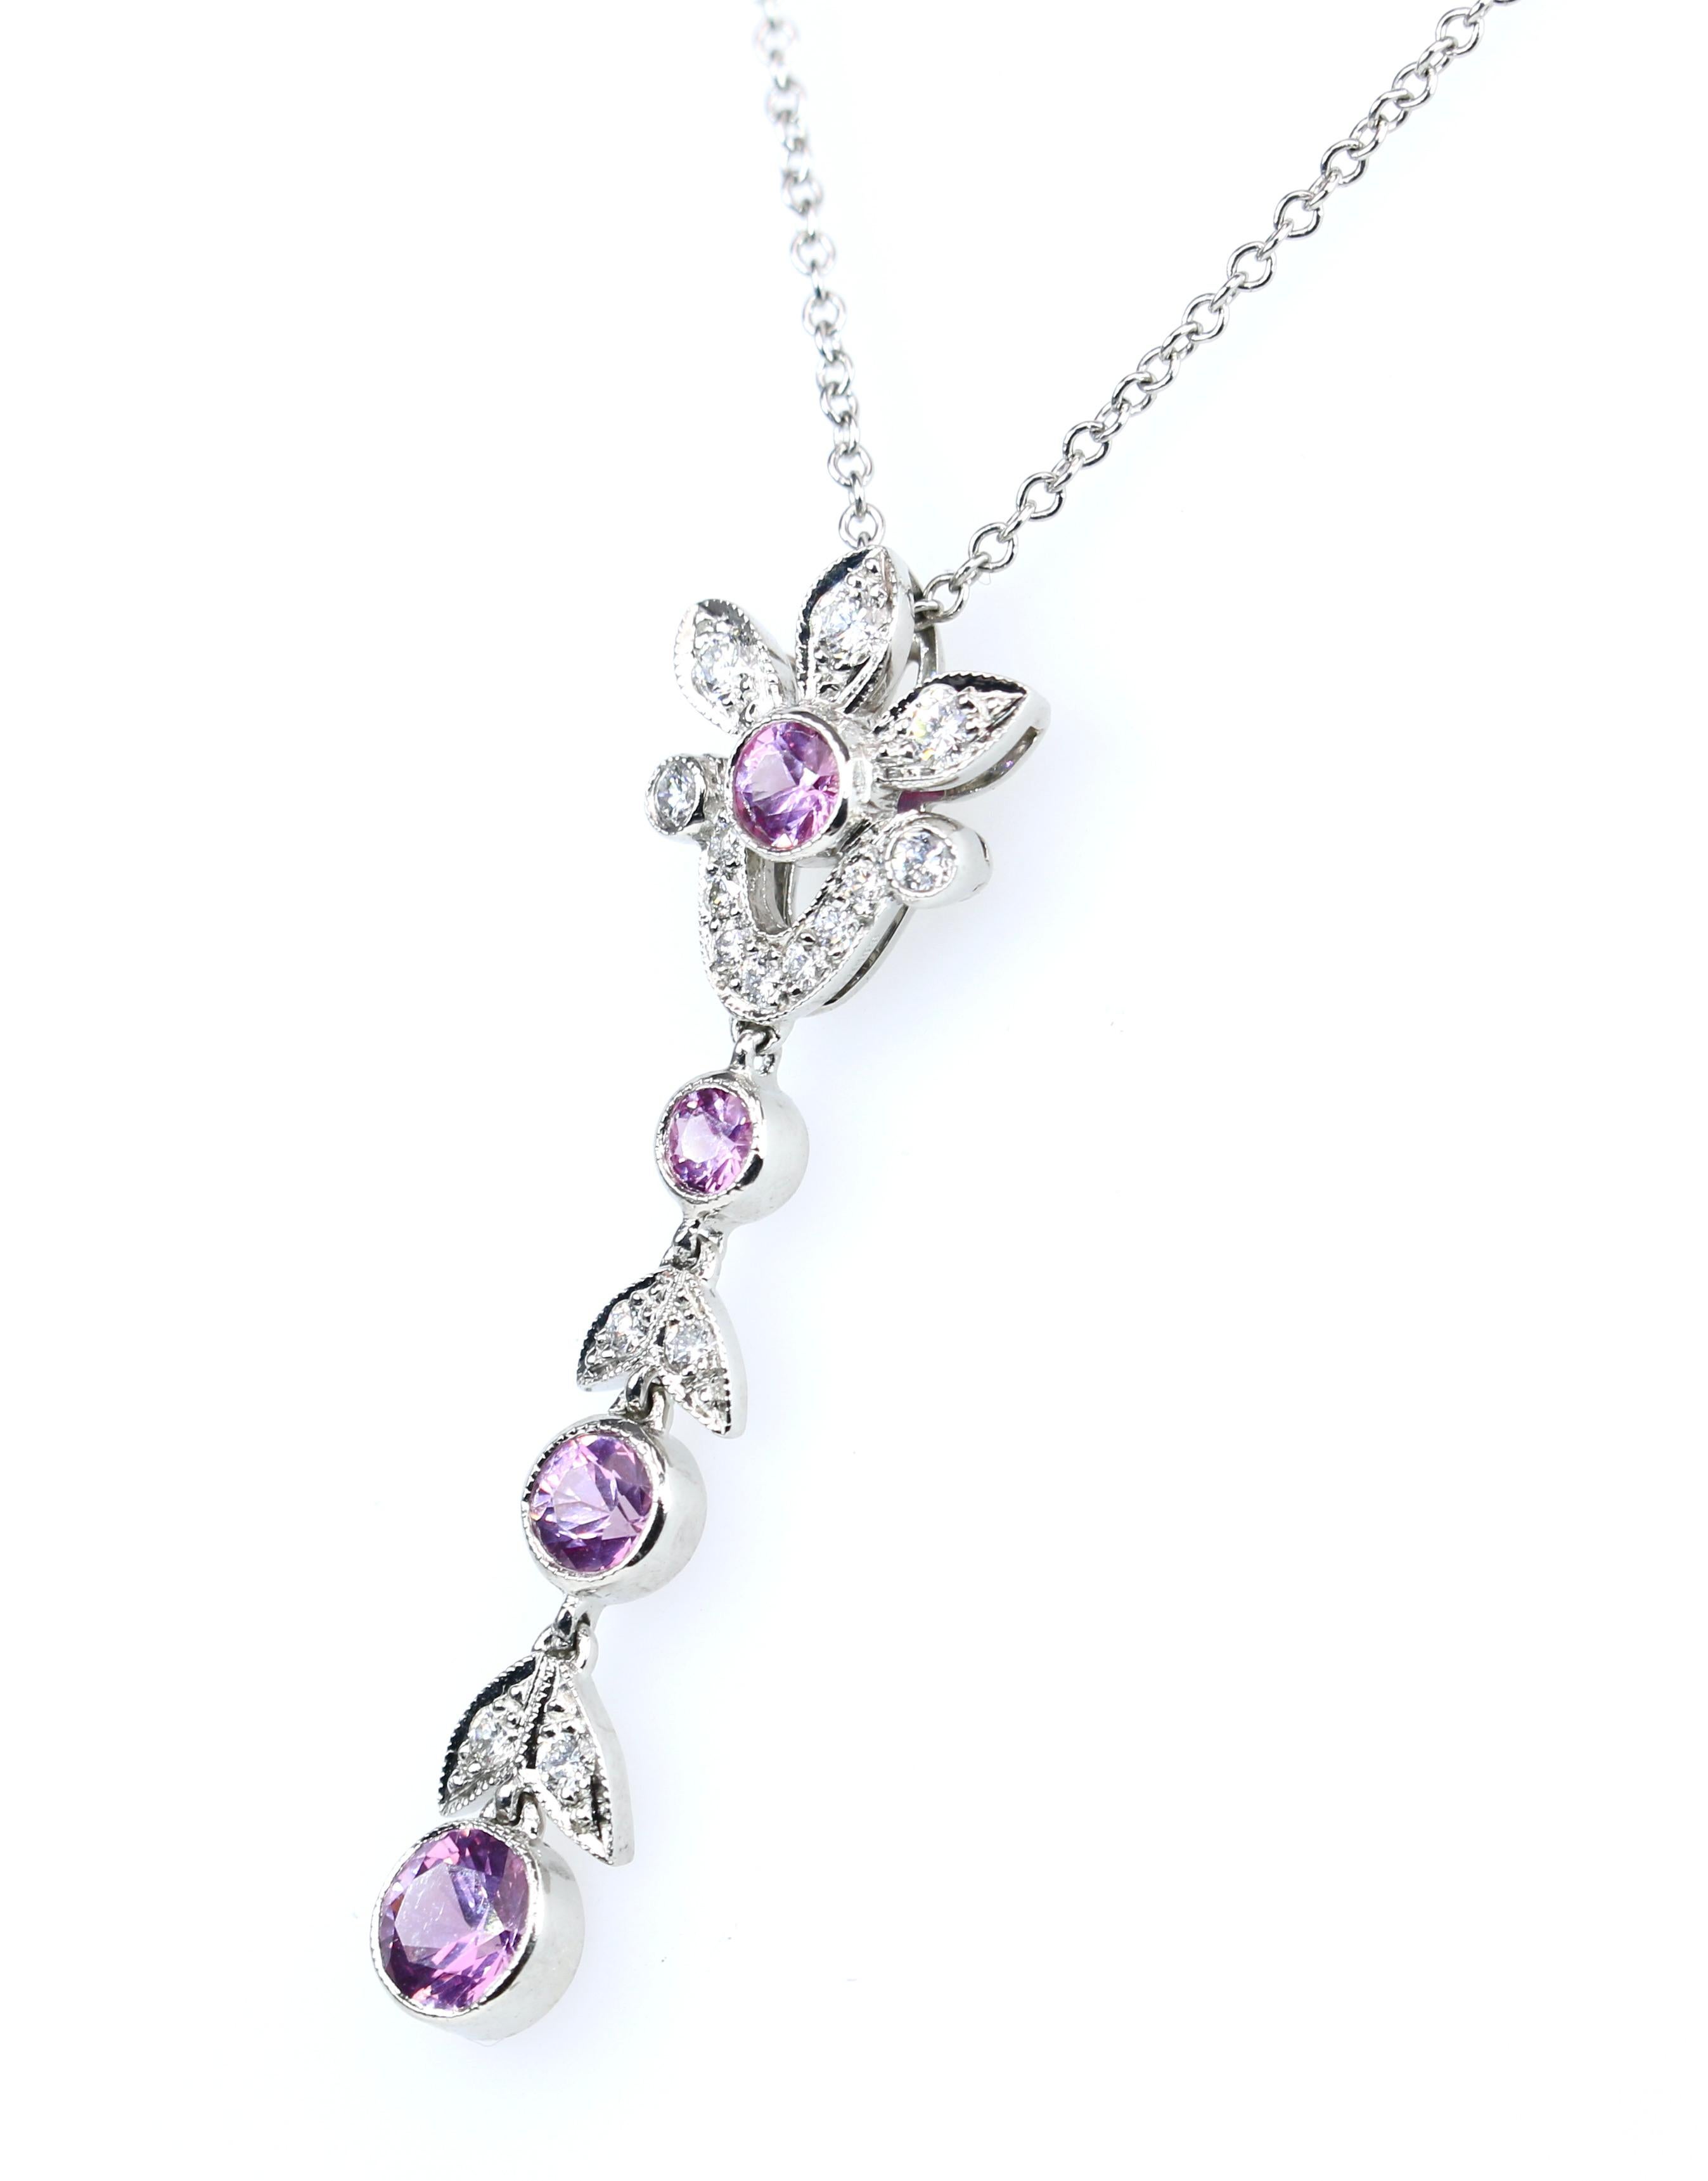 Platinum Diamond and Pink Sapphire 16 inch pendant necklace.
This pendant has approximately .30 CTW diamonds and approximately .80 CTW pink sapphires.
Pendant marked T&Co PT 950 and number. 